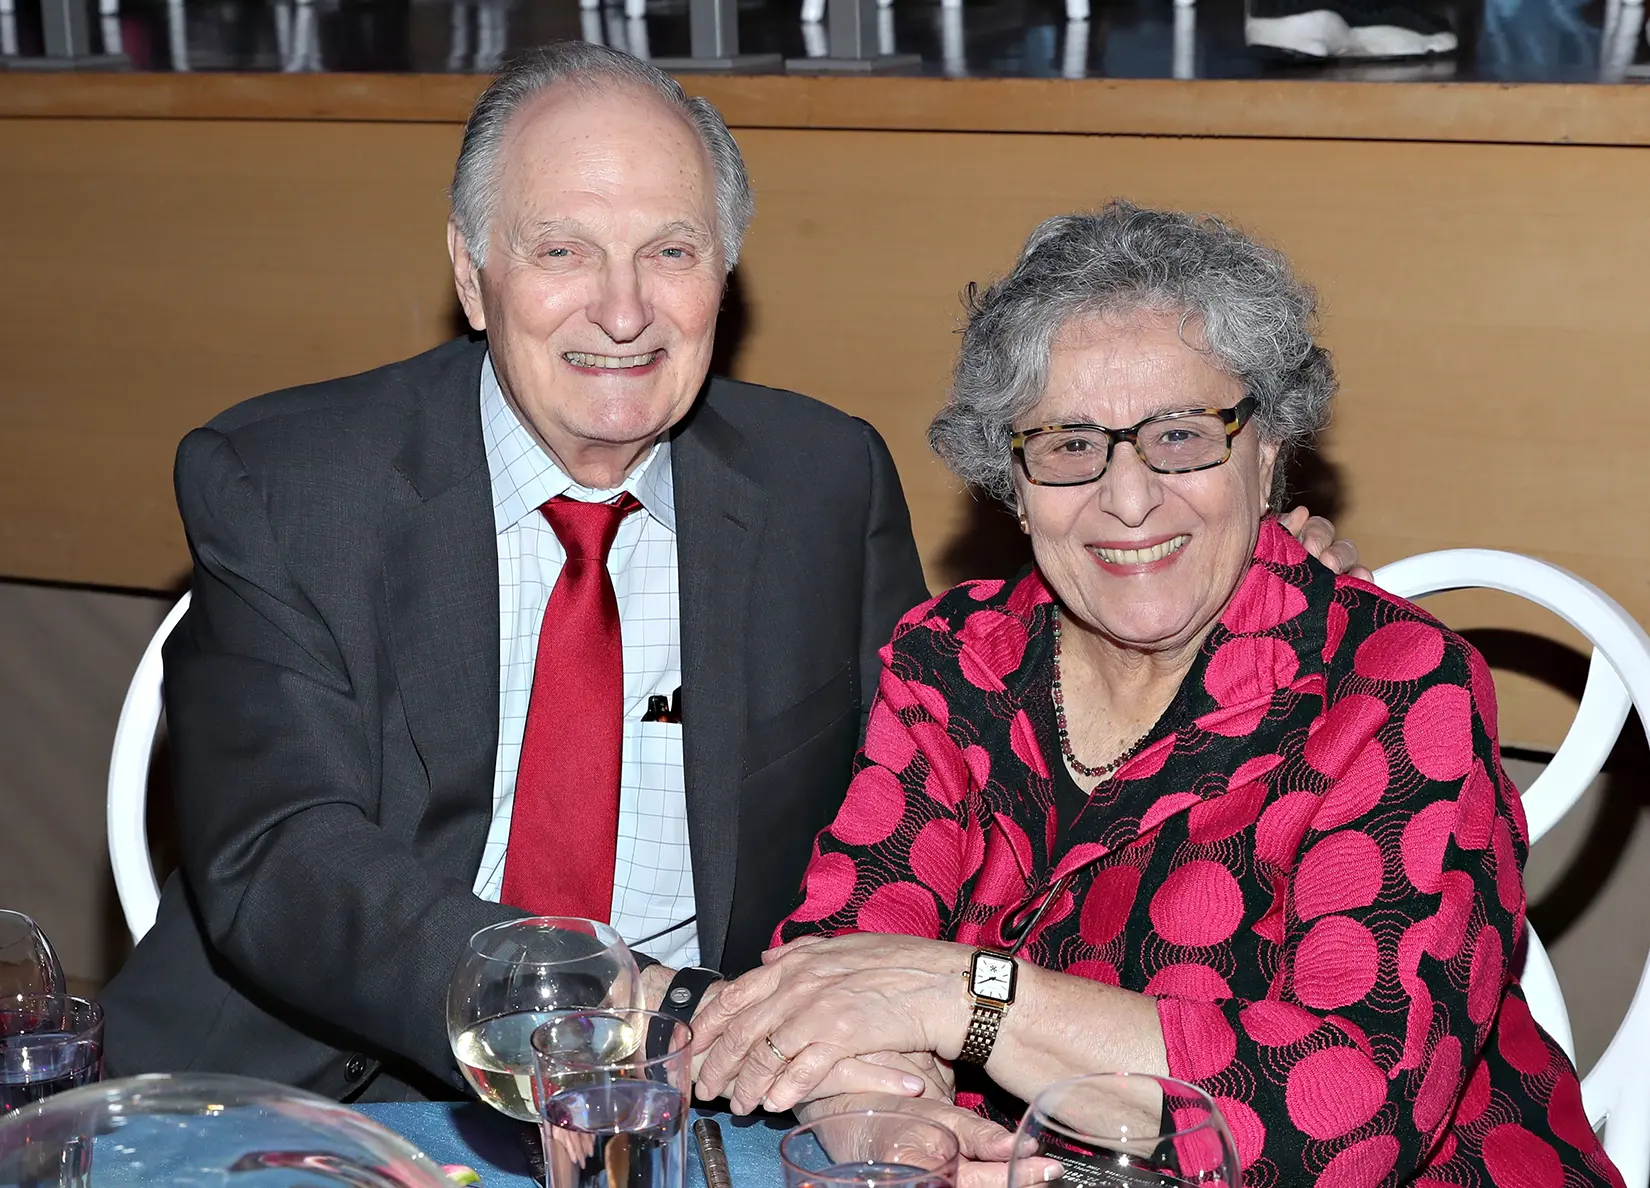 Alan Alda with his longtime wife Arlene Alda at an event